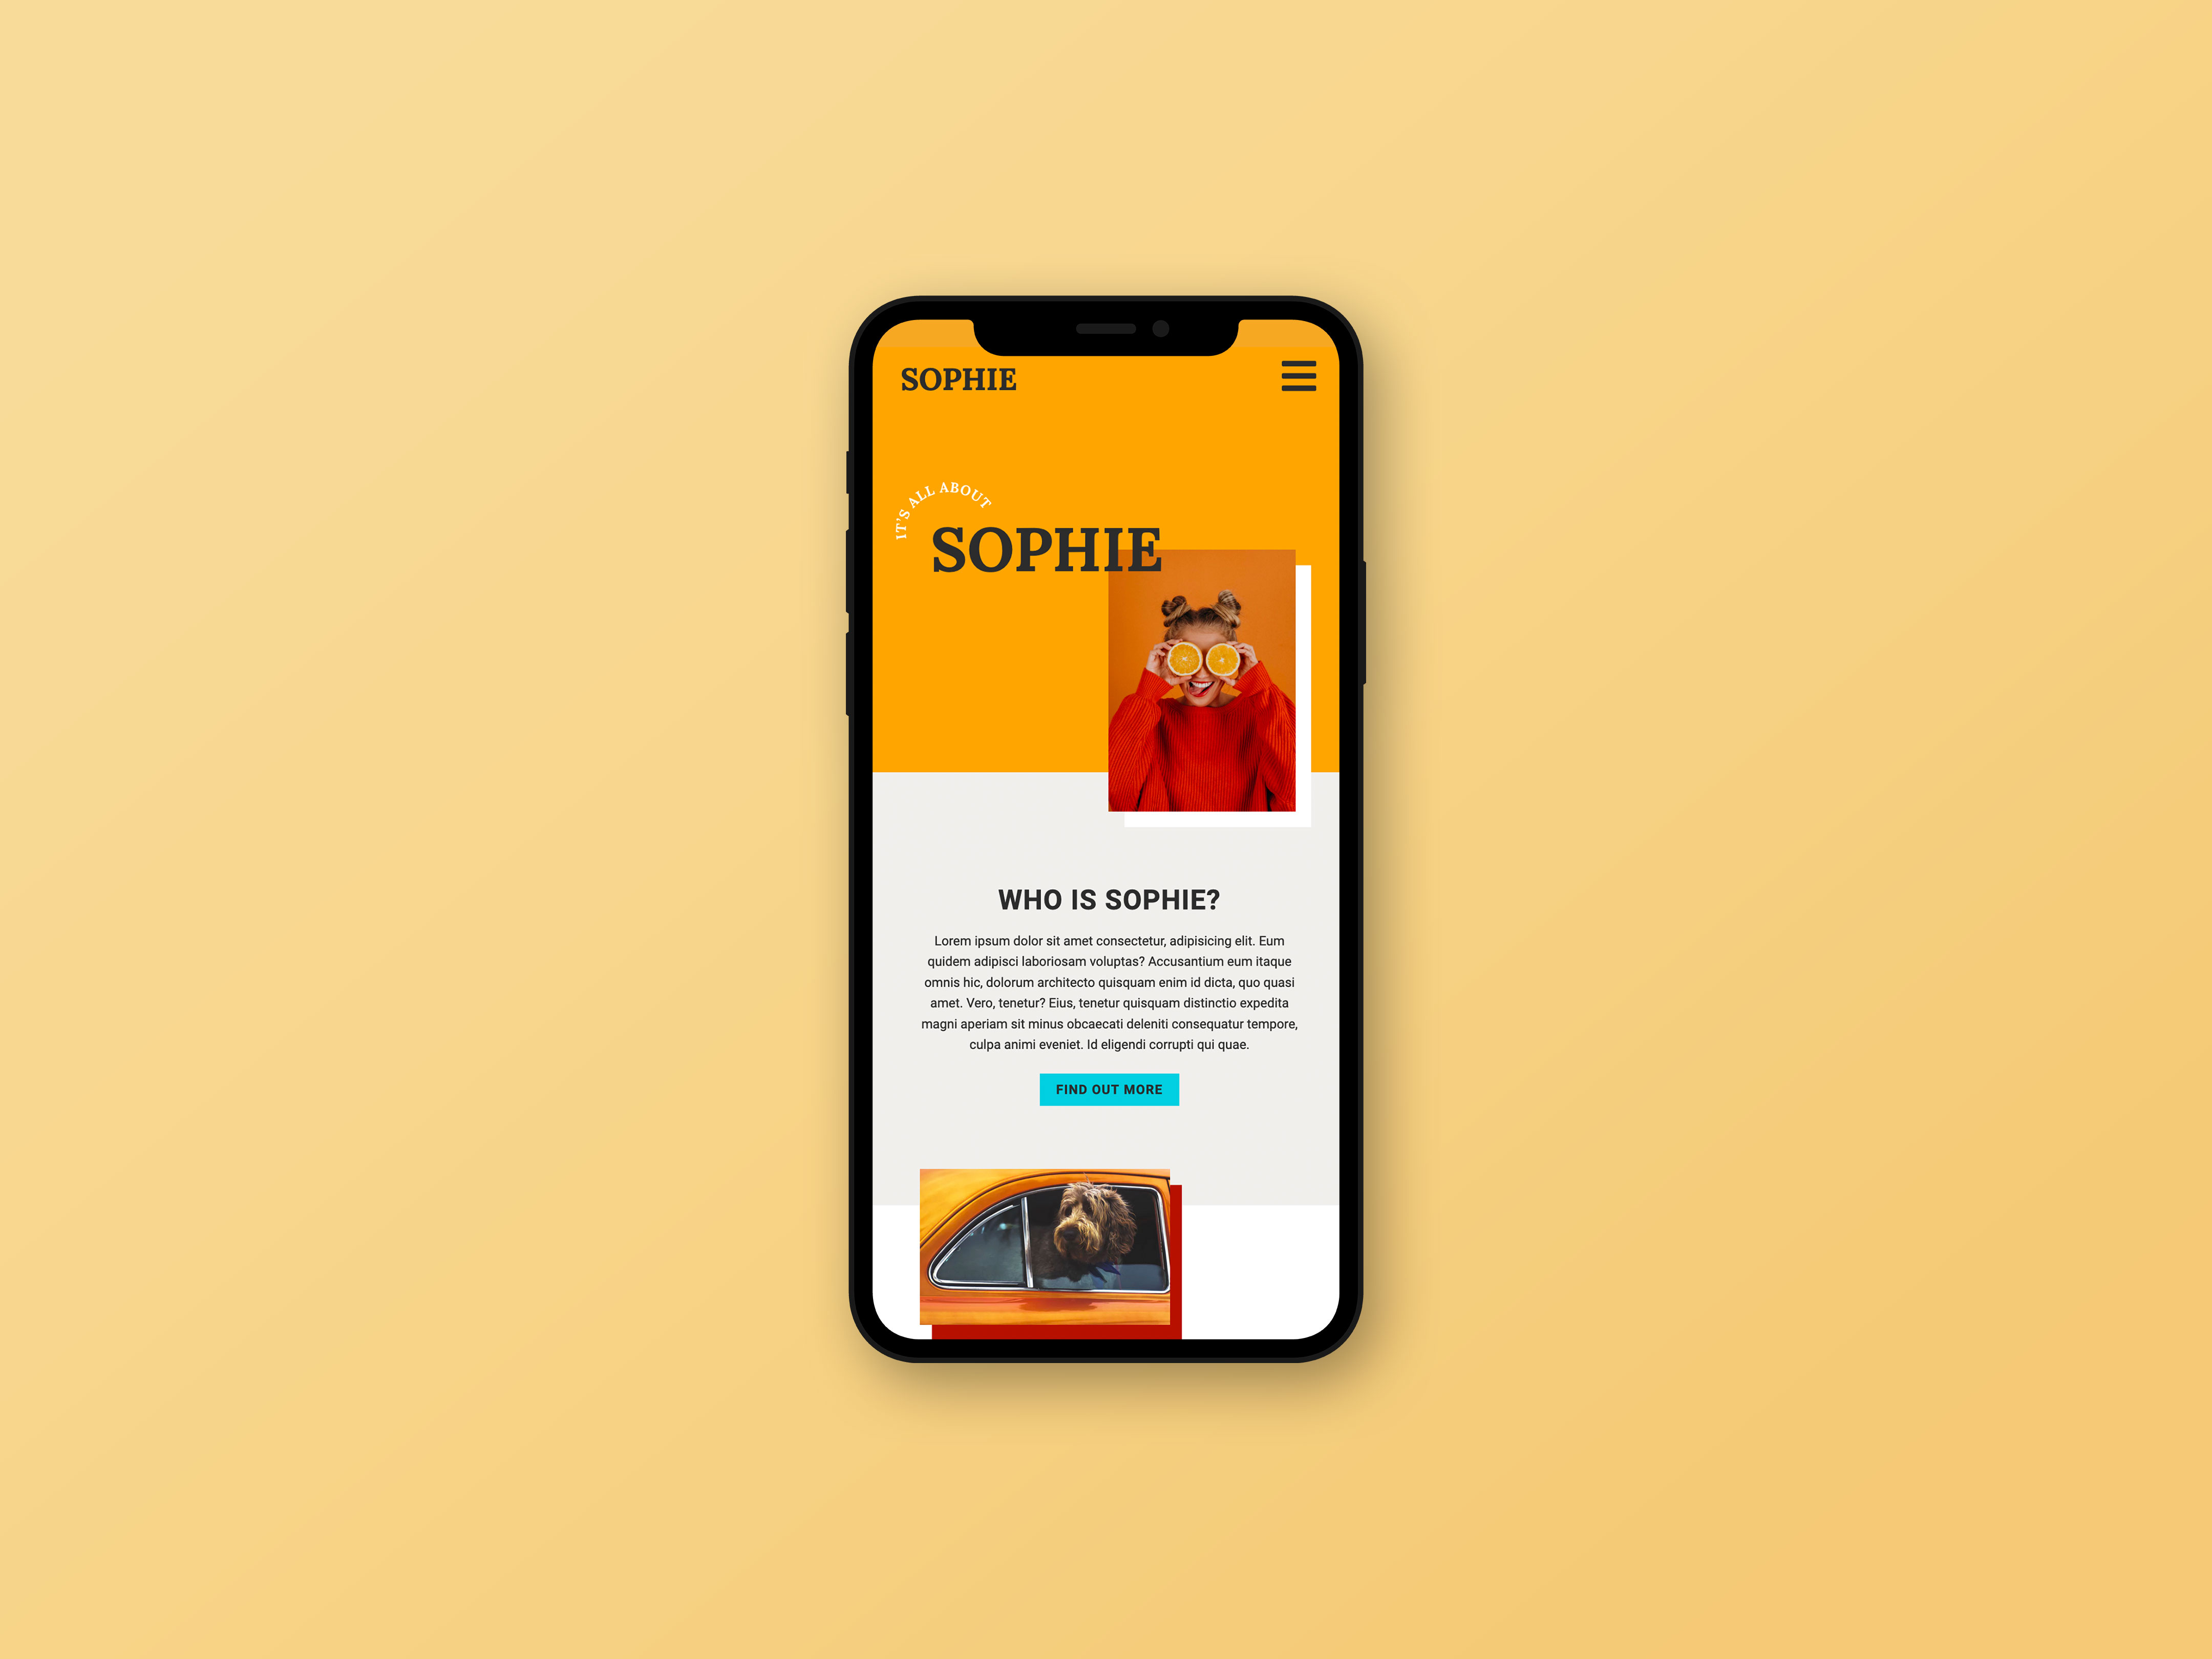 Sophie homepage on an iPhone screen